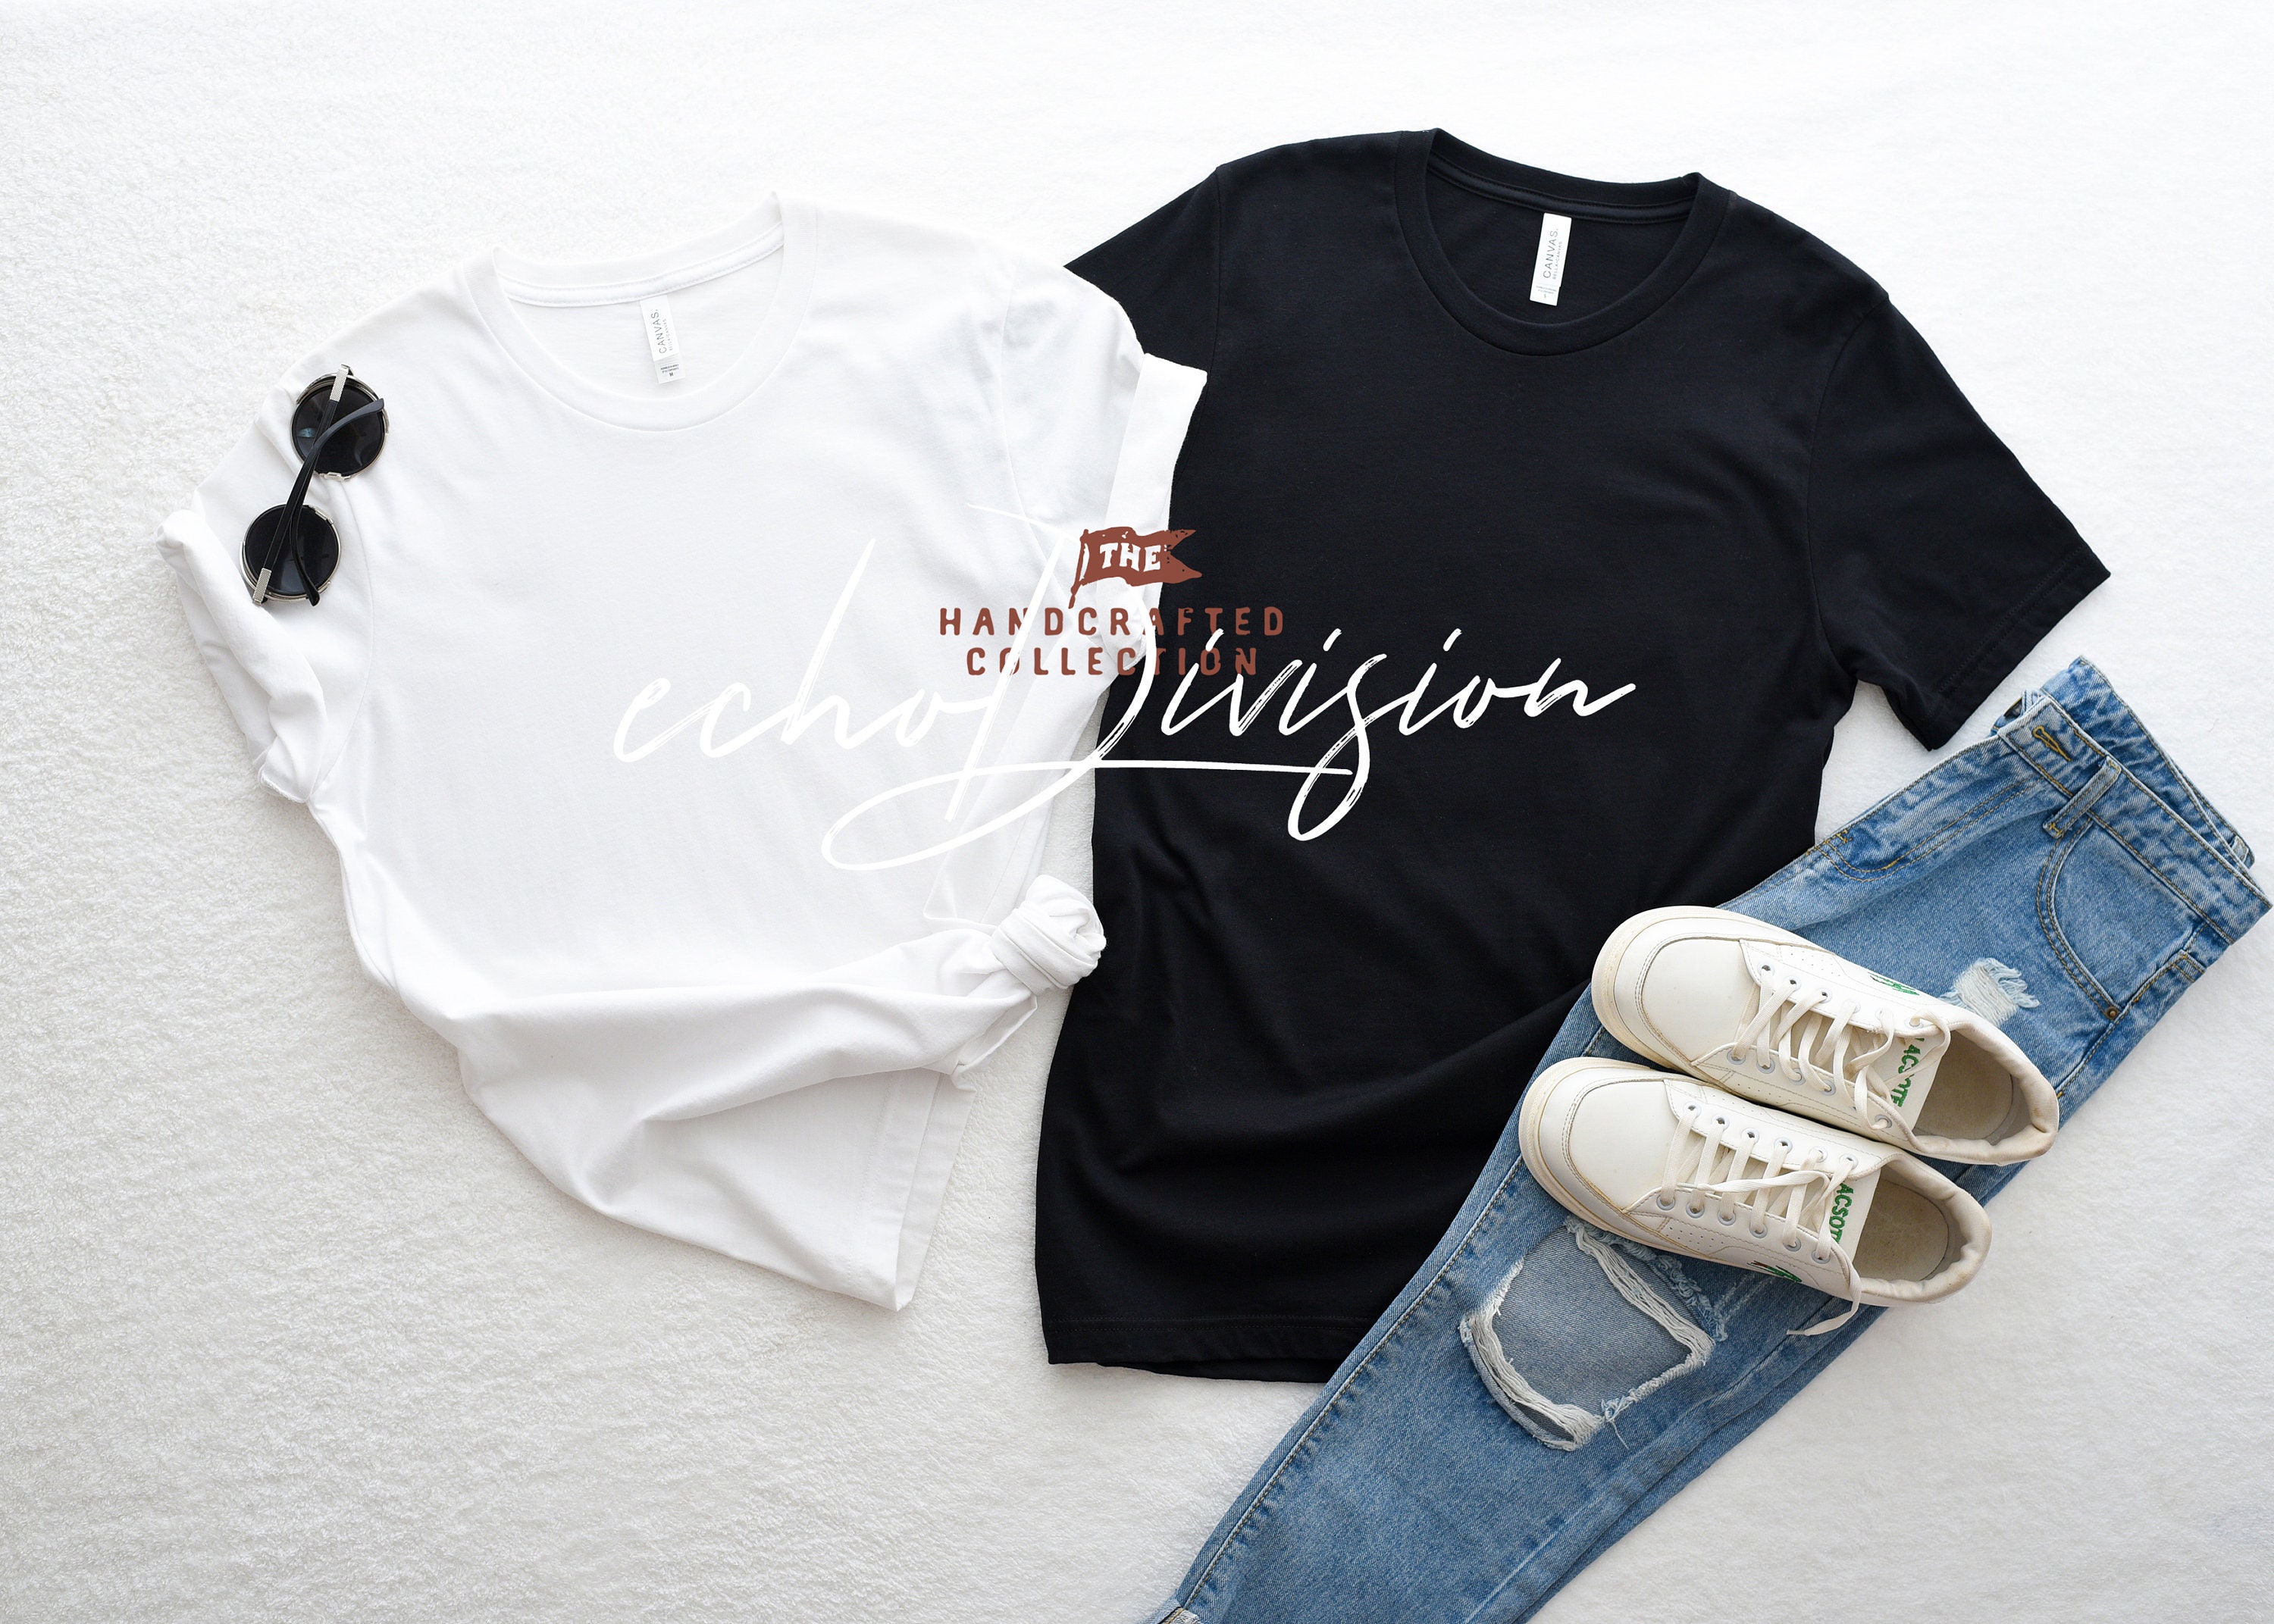 Couple T Shirt Mockup Free Download / Couple T Shirt Mockup Psd Free Download / Everything you ...